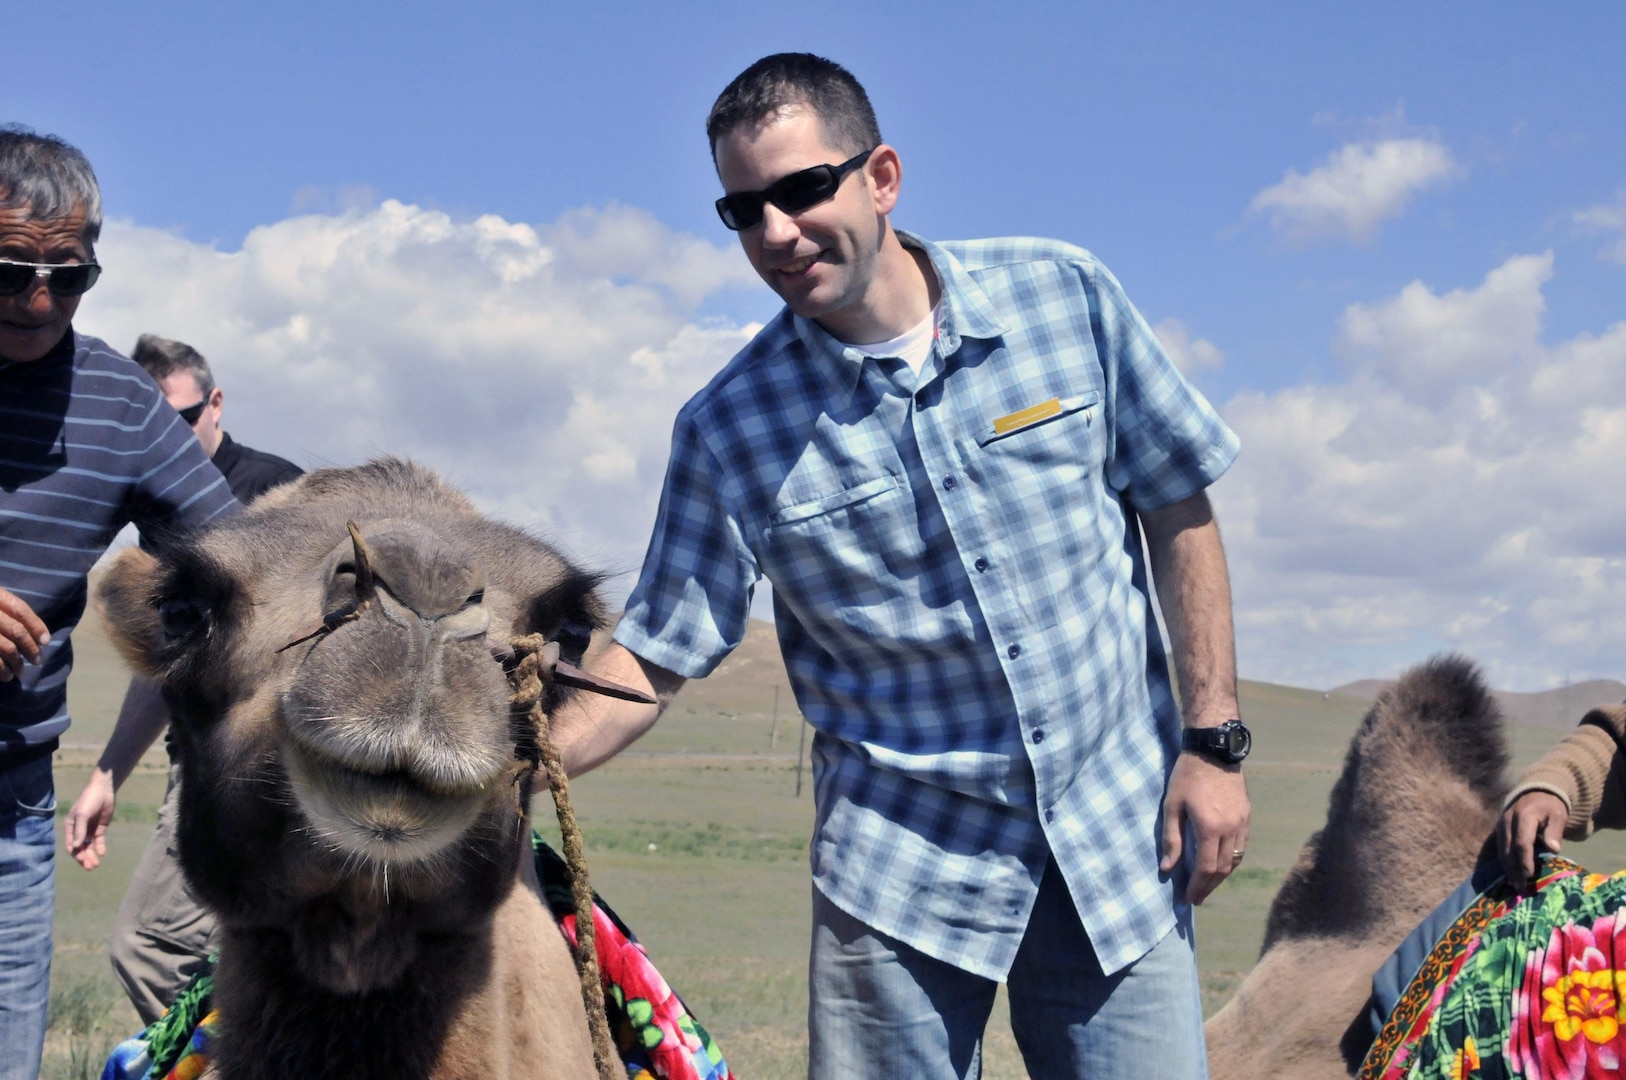 Capt. Chad Ausel, a member of the 761st Military Police Battalion of the Alaska Army National Guard, pets a camel to get more comfortable before taking a ride on its back during a Morale, Welfare and Recreation day in Ulaanbaatar, Mongolia, Aug. 15, 2010.